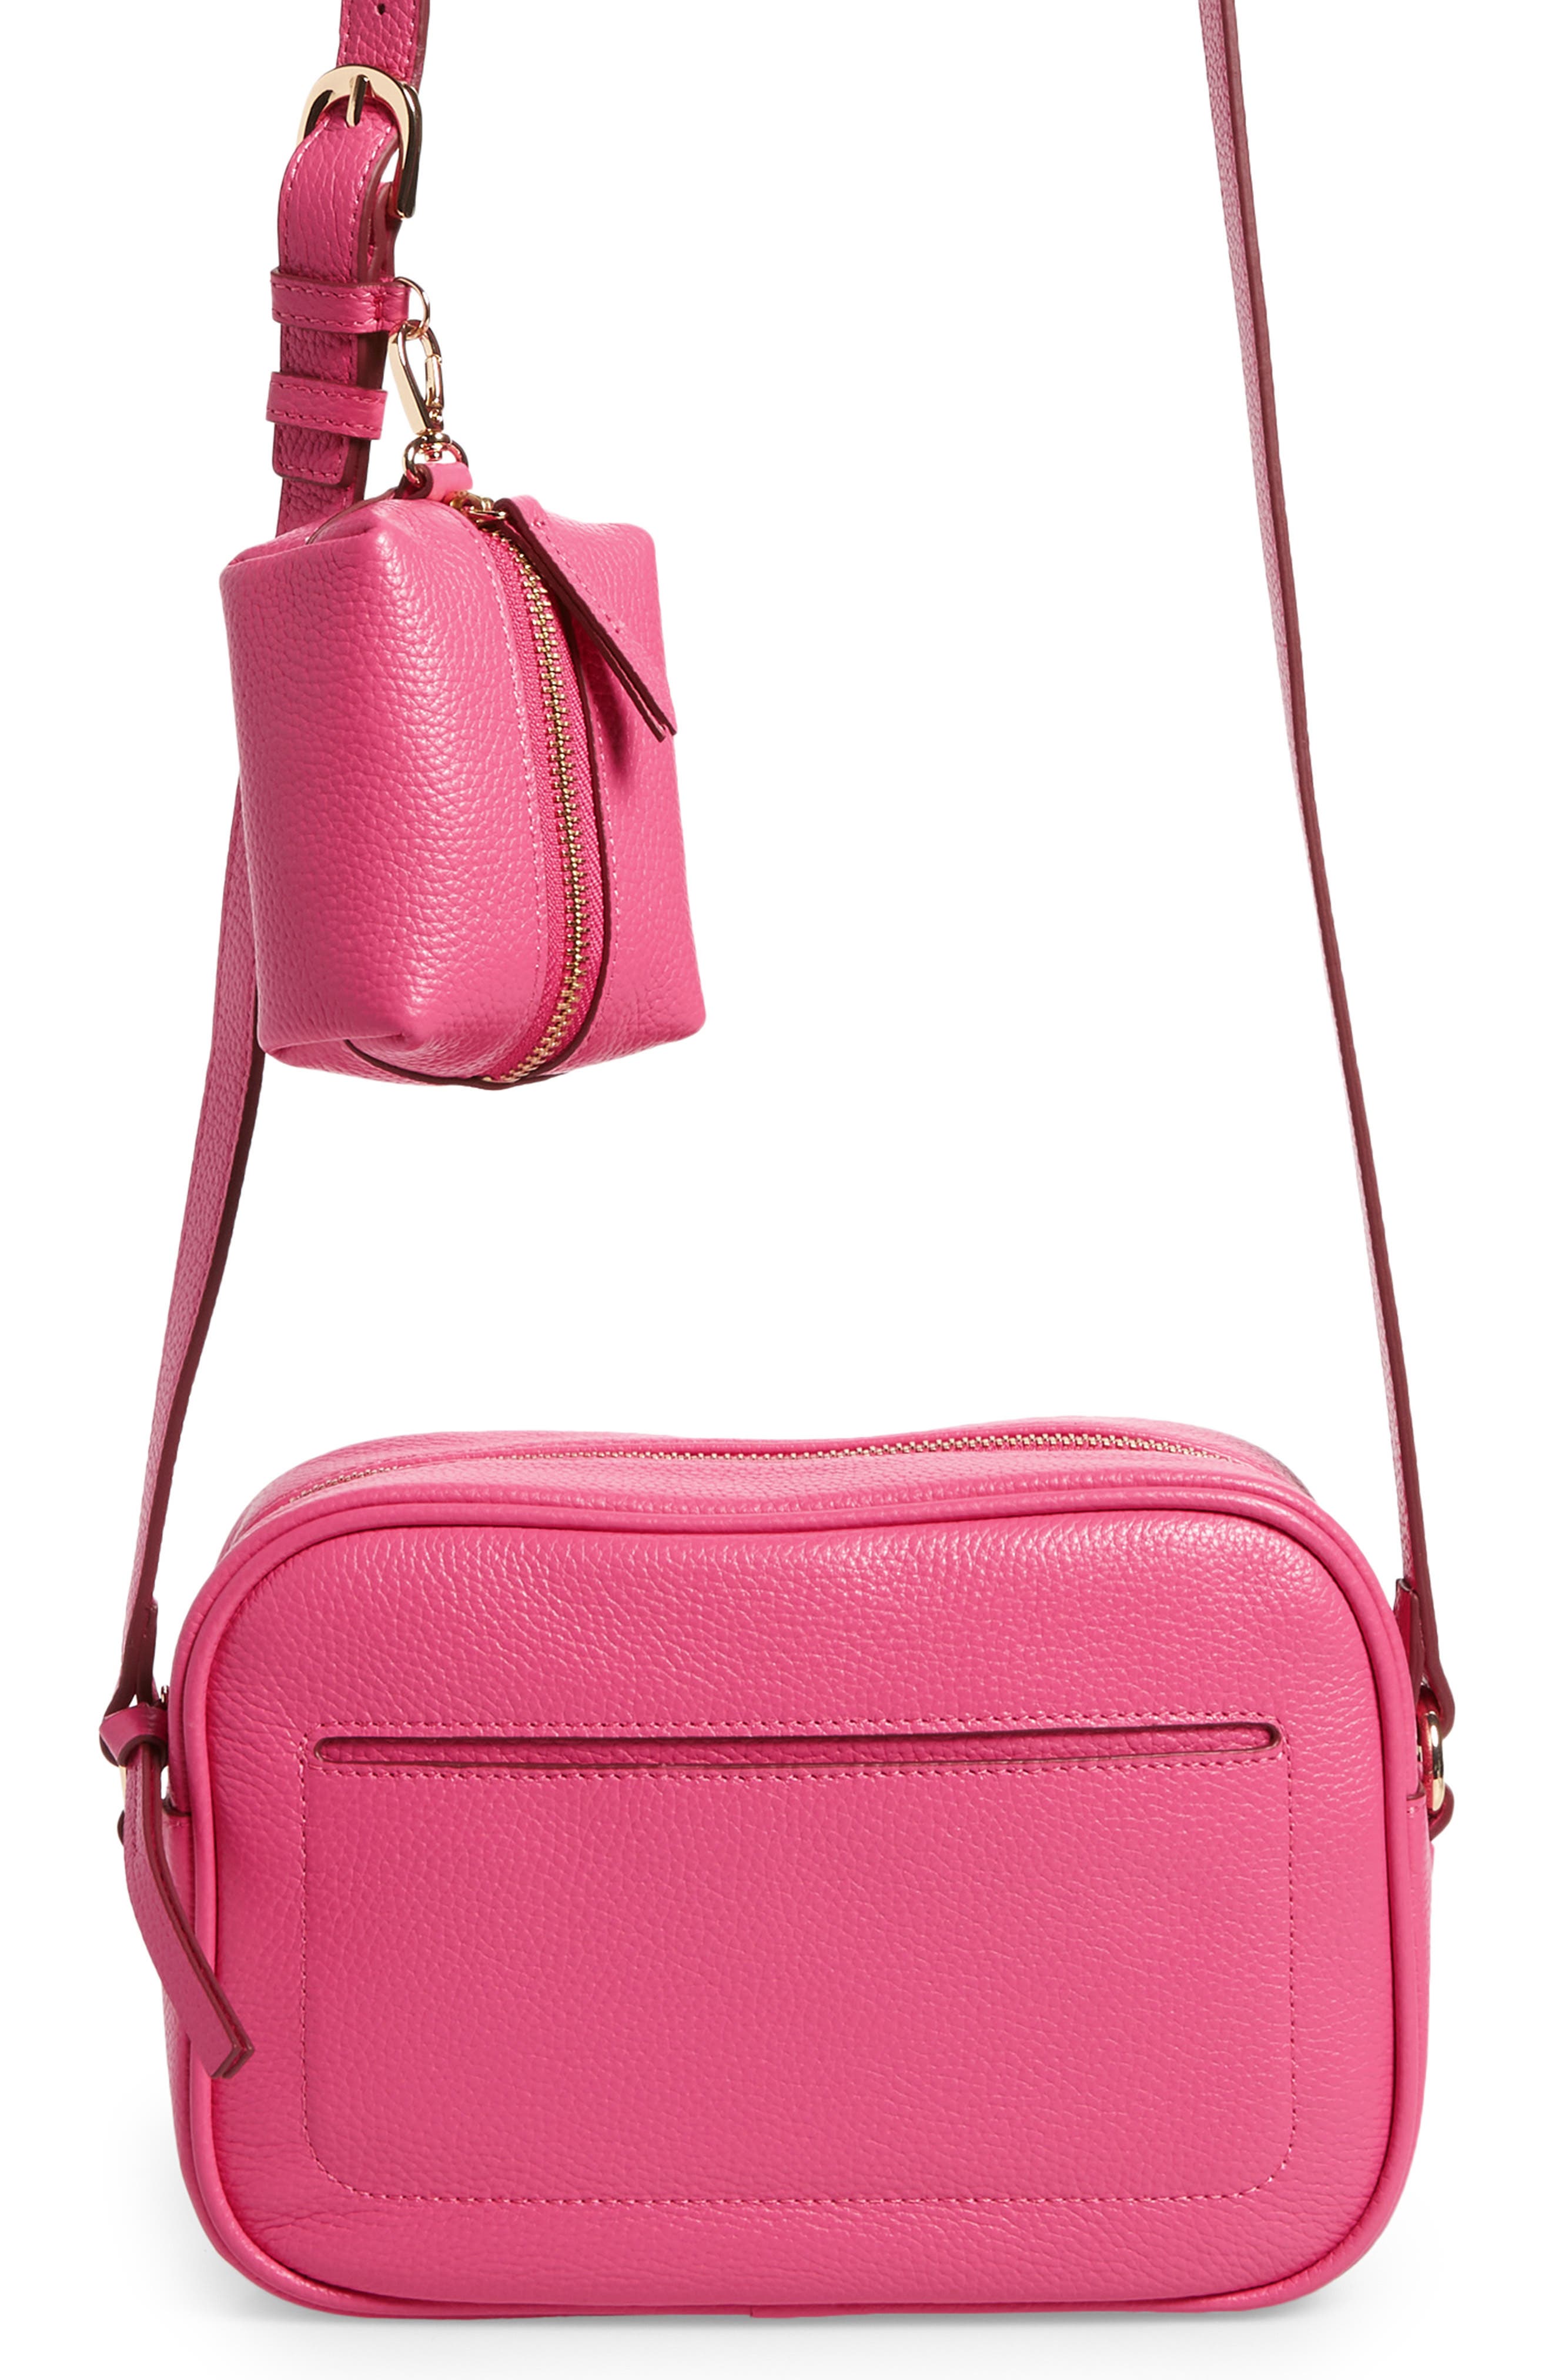 Casual bag and unique leather bag Small crossbody bag and Mini crossbody bag Pink leather clutch Pink crossbody bag